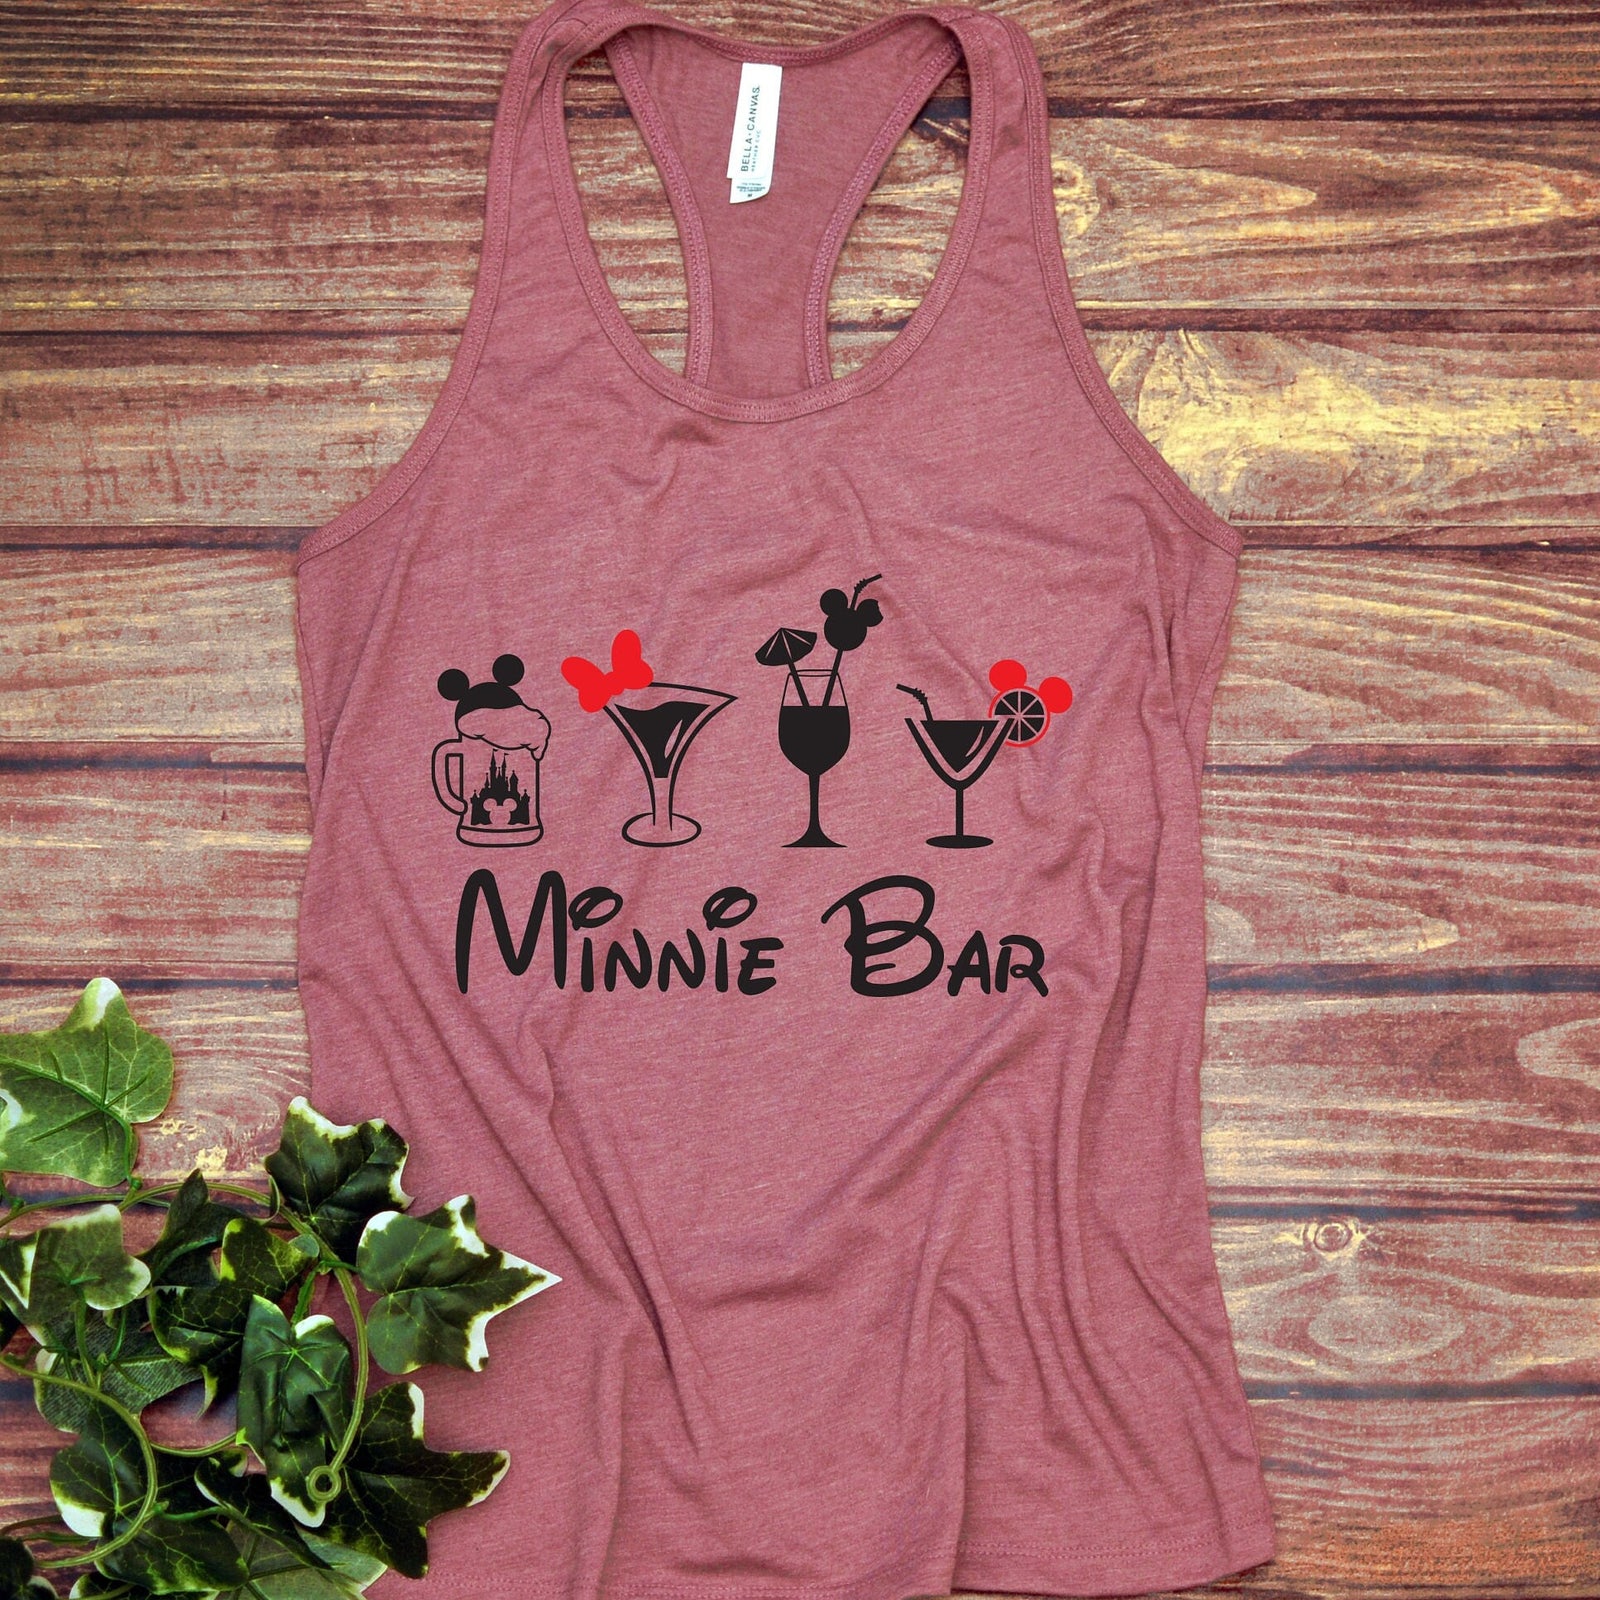 Minnie Mouse Ladies Racer Back Tank Top- Minnie Bar - Drinks - Epcot Food and Wine